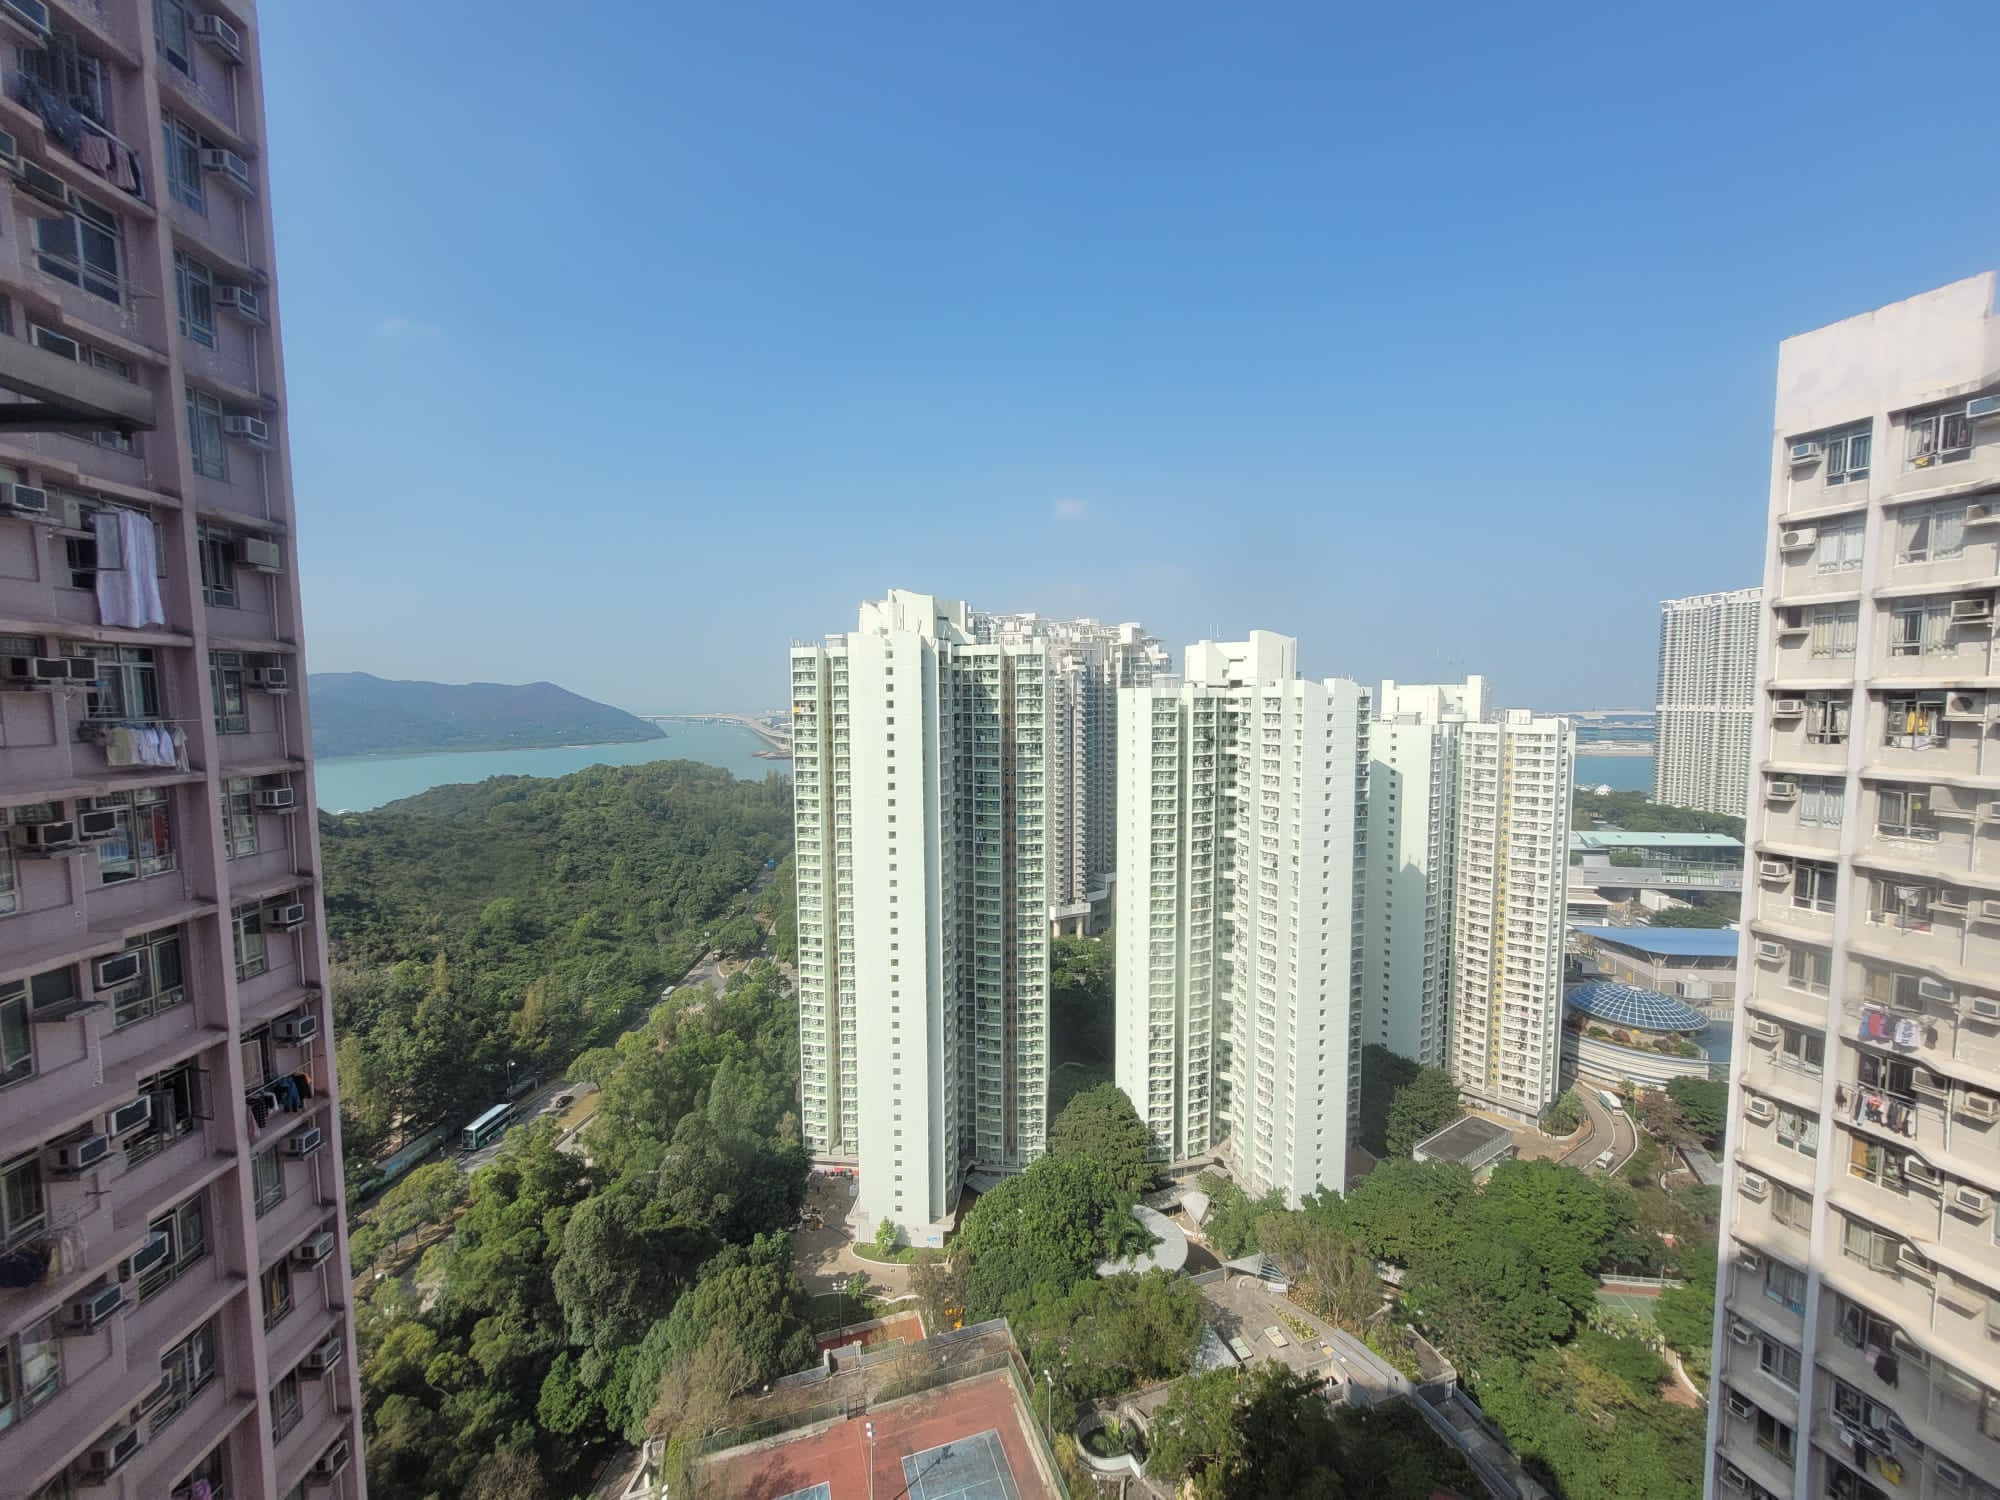 The real high-rise emerald green mountain view and the crane sea view hall are very practical